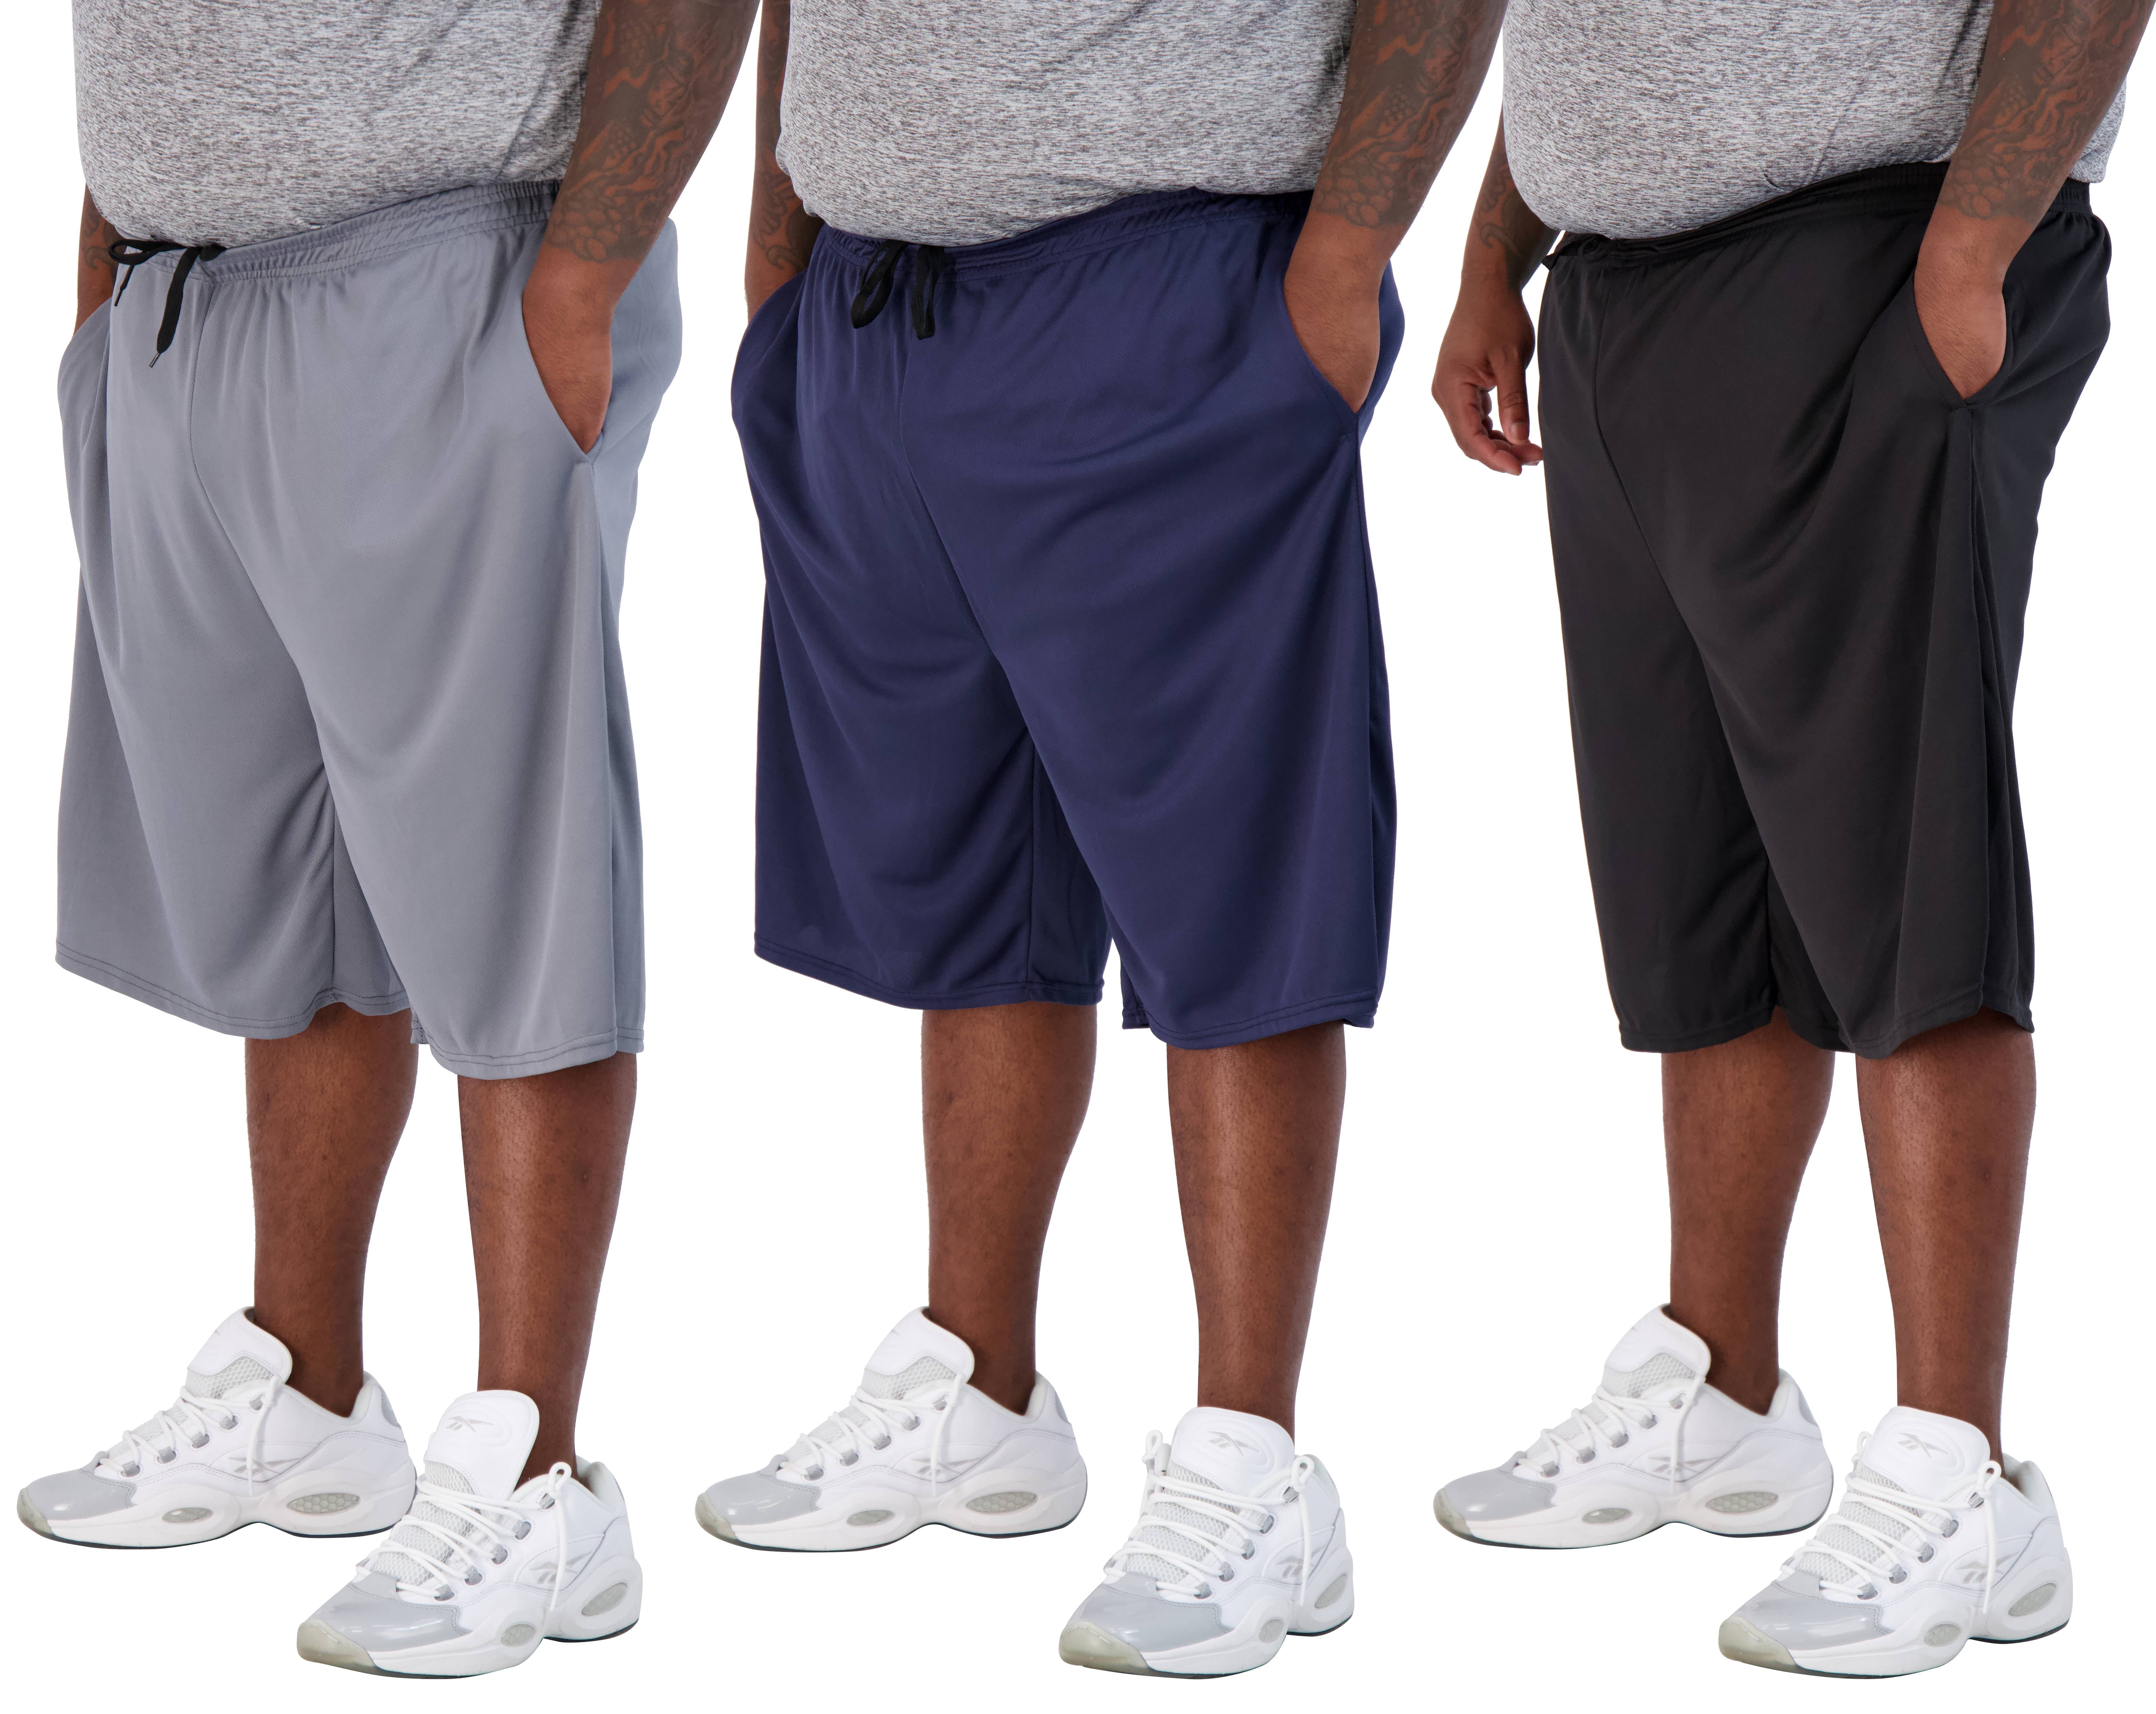 Real Essentials Men's Big & Tall 3-Pack Dry Fit & Mesh Active Athletic Perfomance Shorts 3X-5X